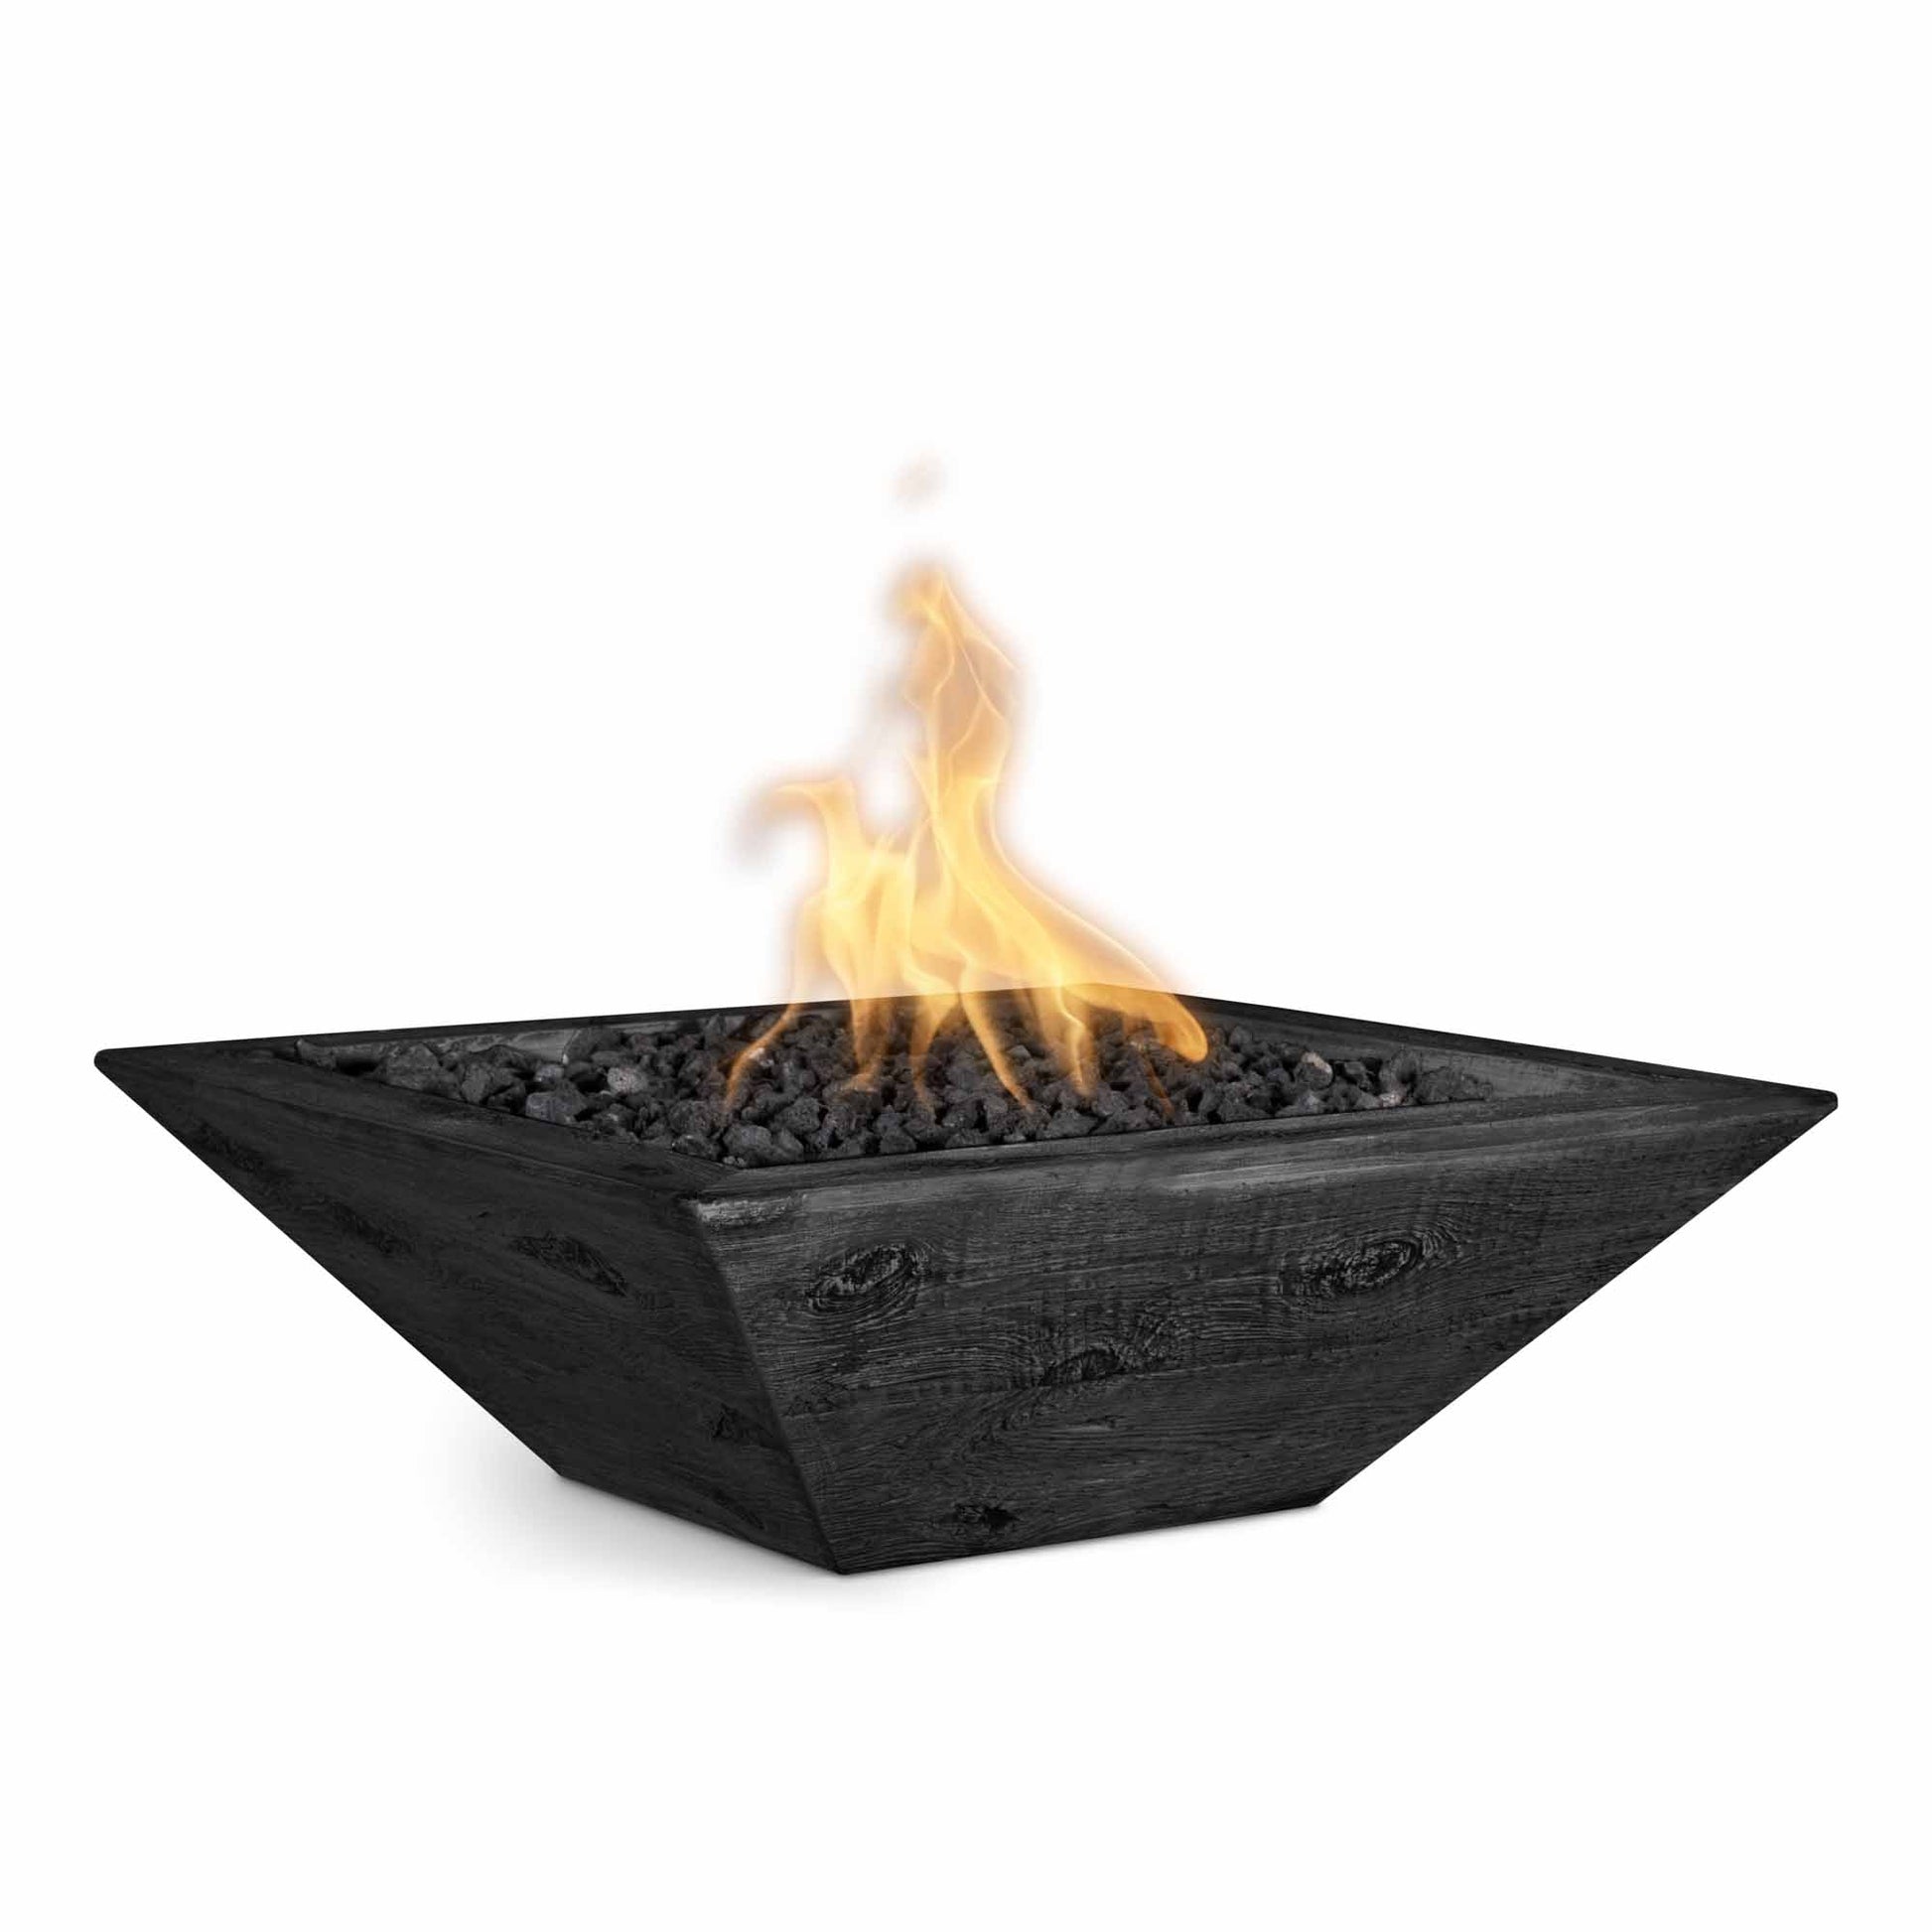 The Outdoor Plus Square Maya 30" Ivory Wood Grain Liquid Propane Fire Bowl with Match Lit with Flame Sense Ignition